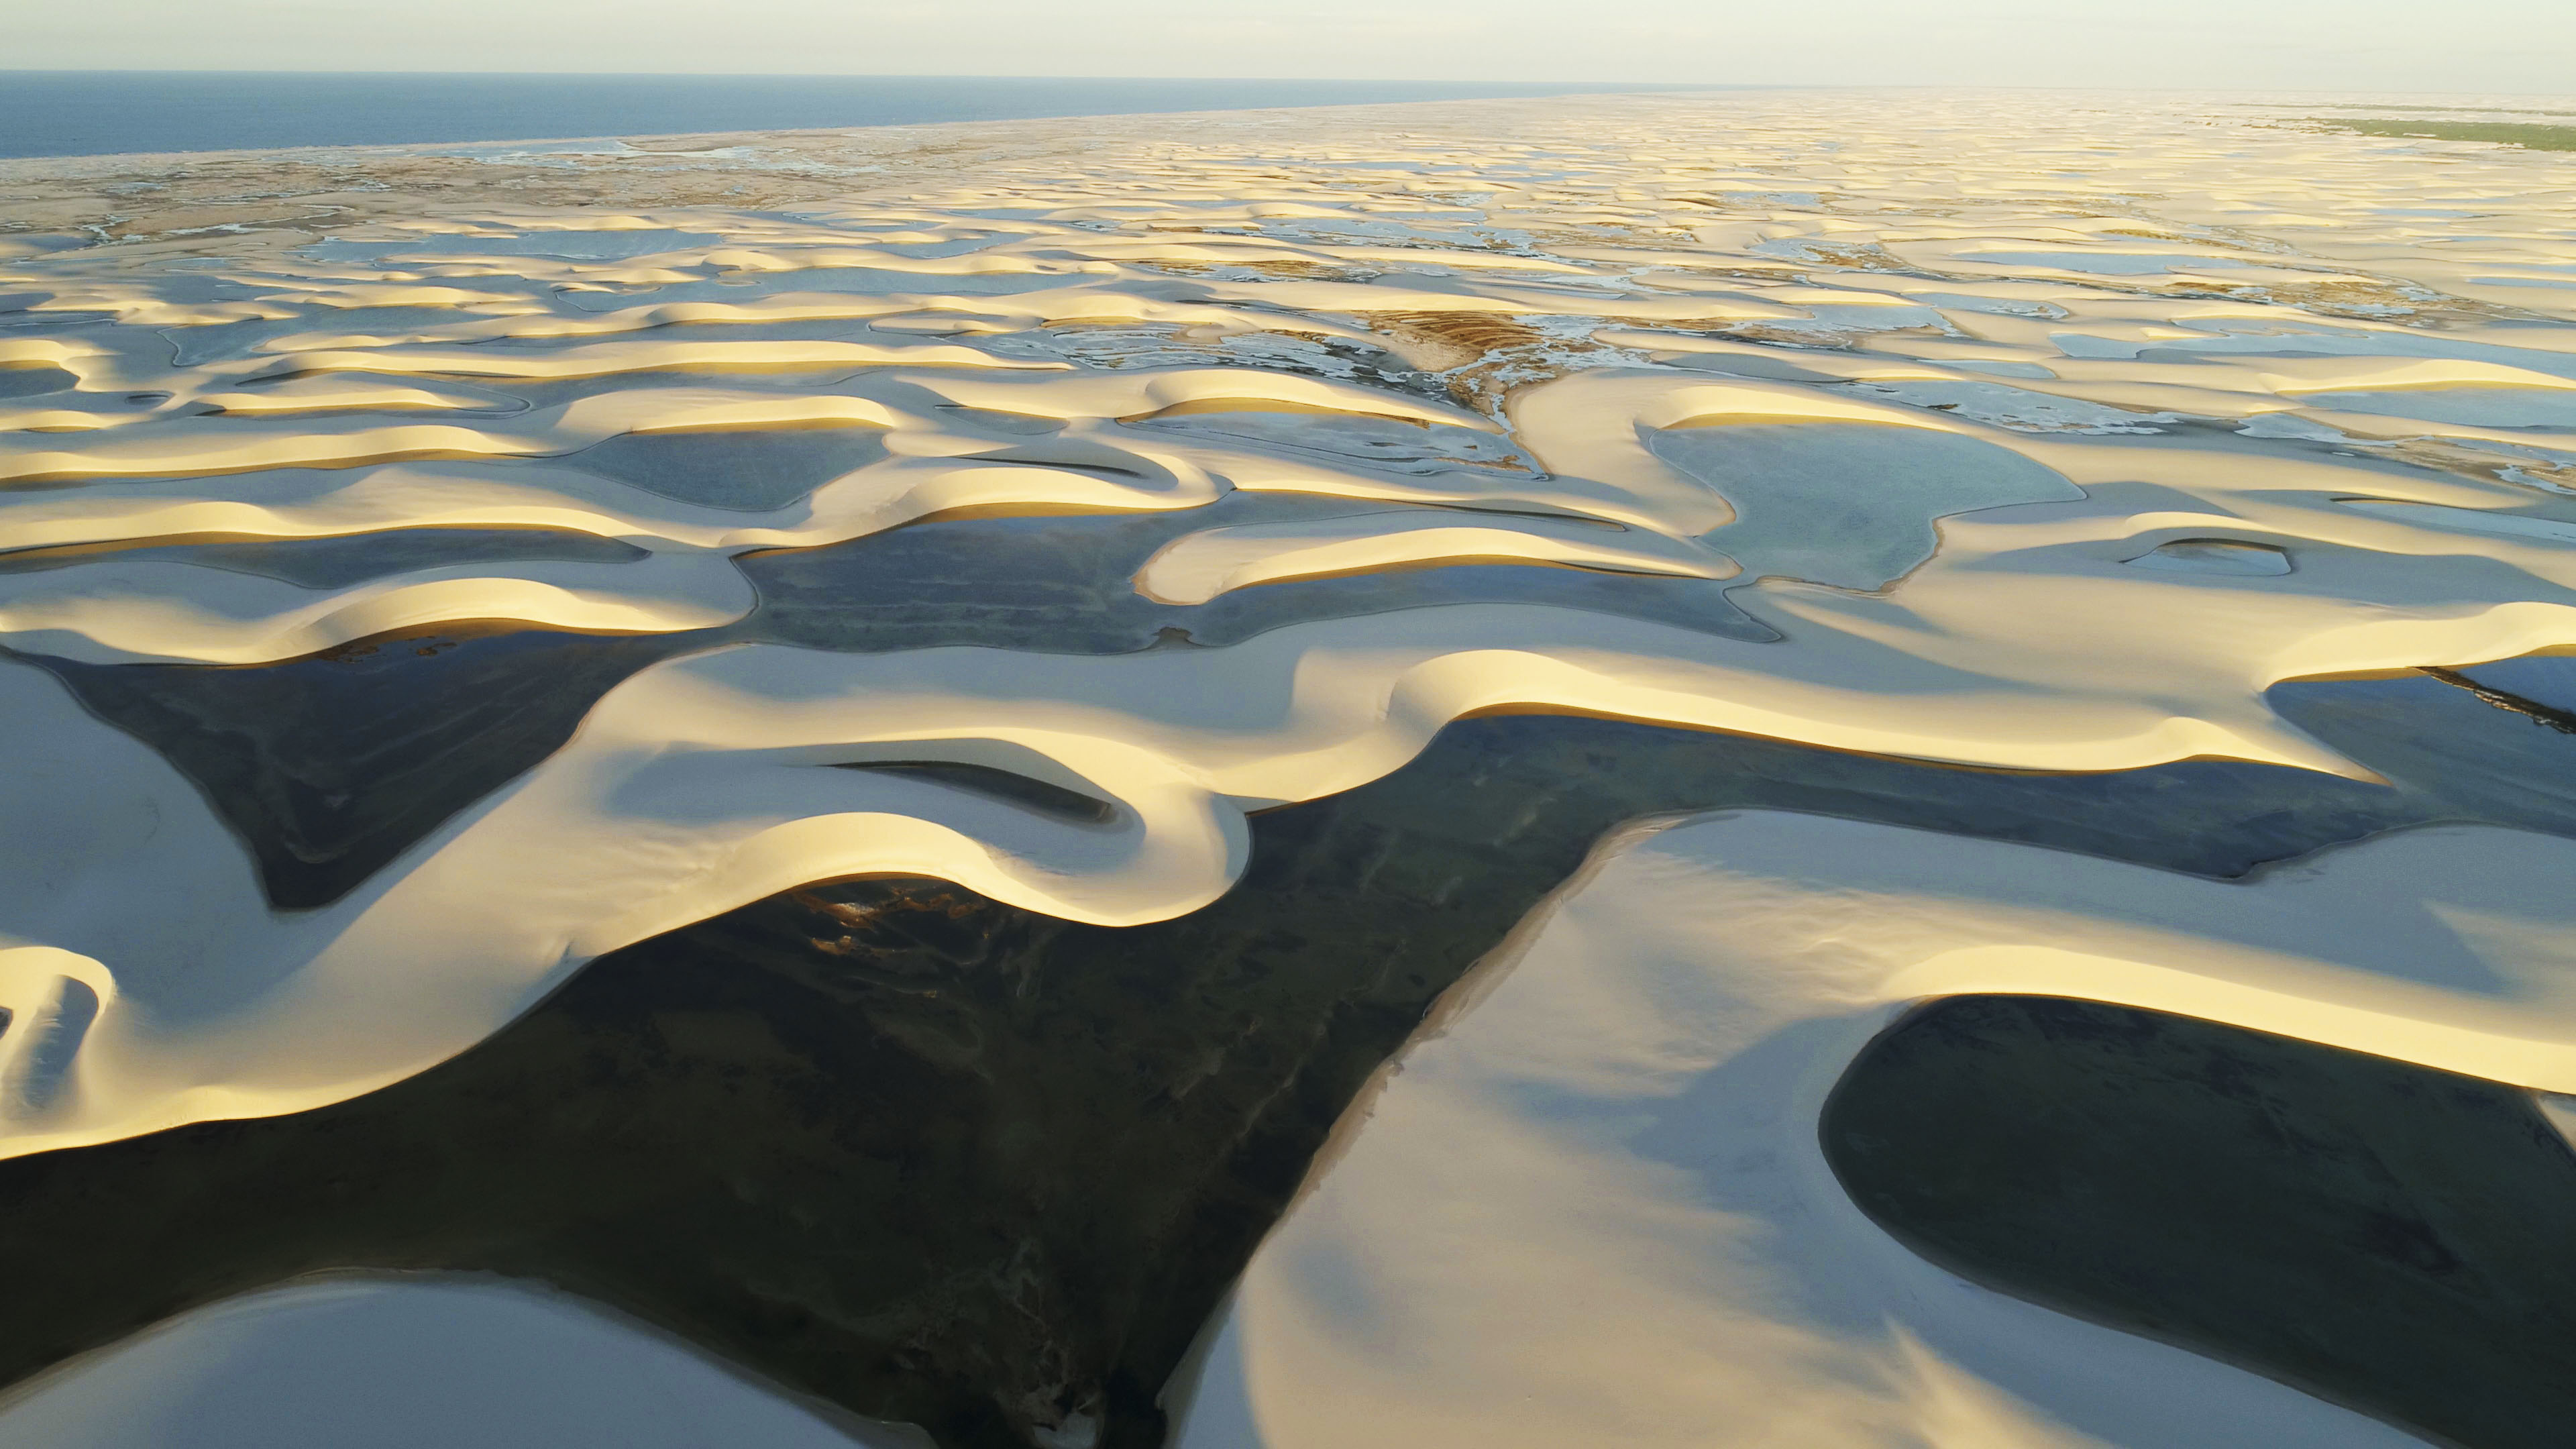 The Lencois Maranhenses National Park, Brazil. These dunes and pools are hunting grounds for the stripey paninga turtle (BBC/PA)